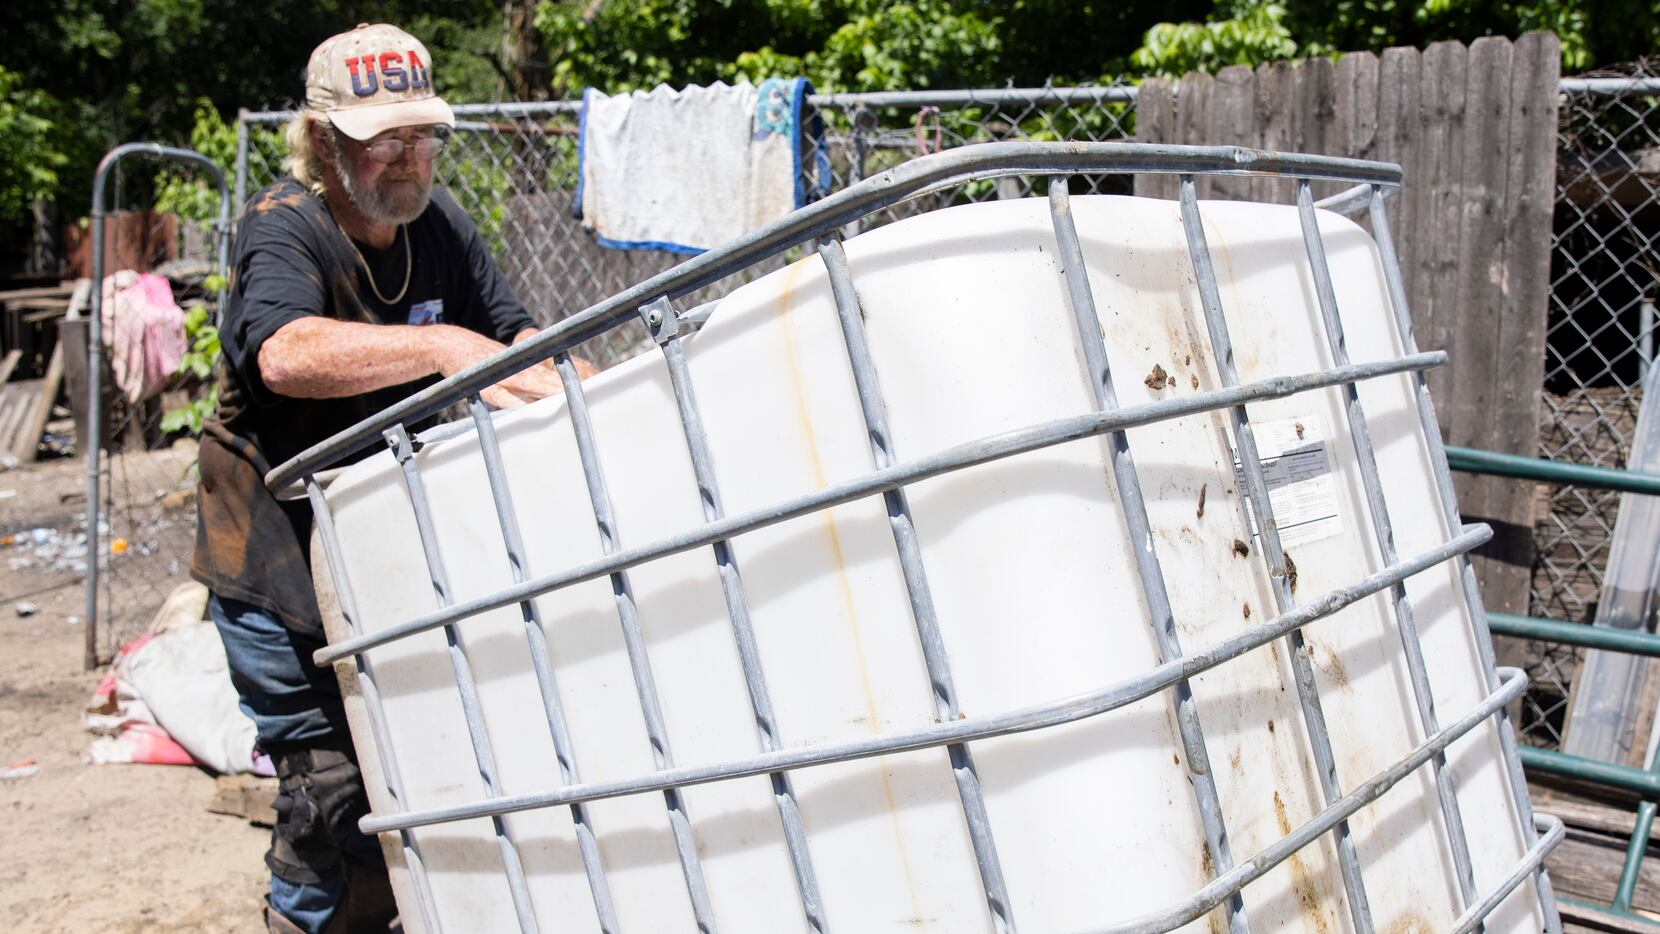 Richard Shivers flips over the water container tank he uses to transport water to the lot...